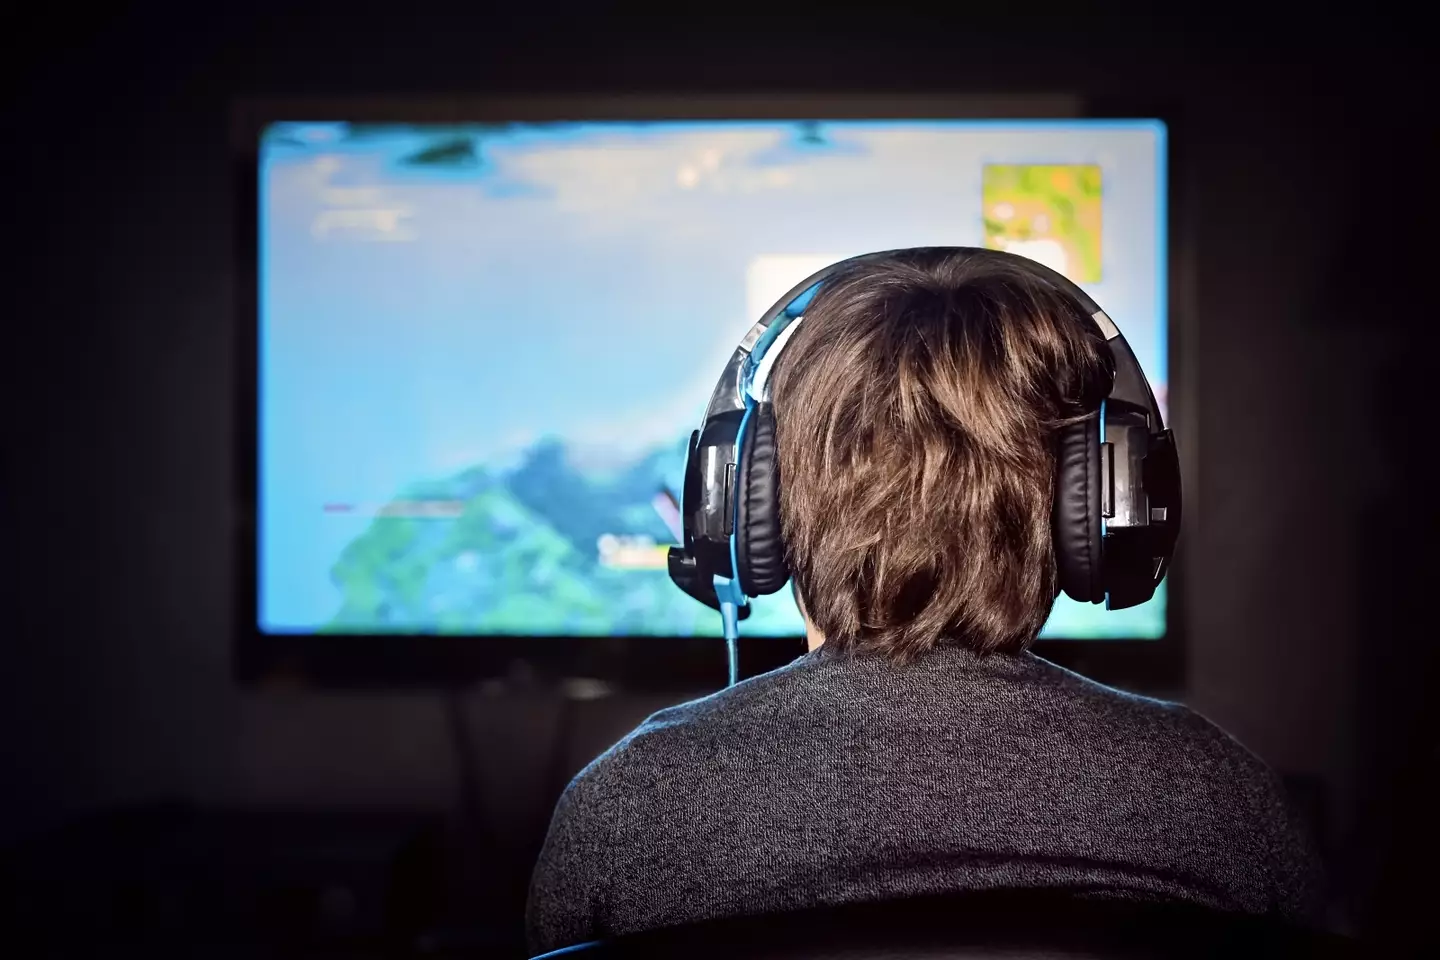 The World Health Organization has made 'gaming disorder' a recognised illness.